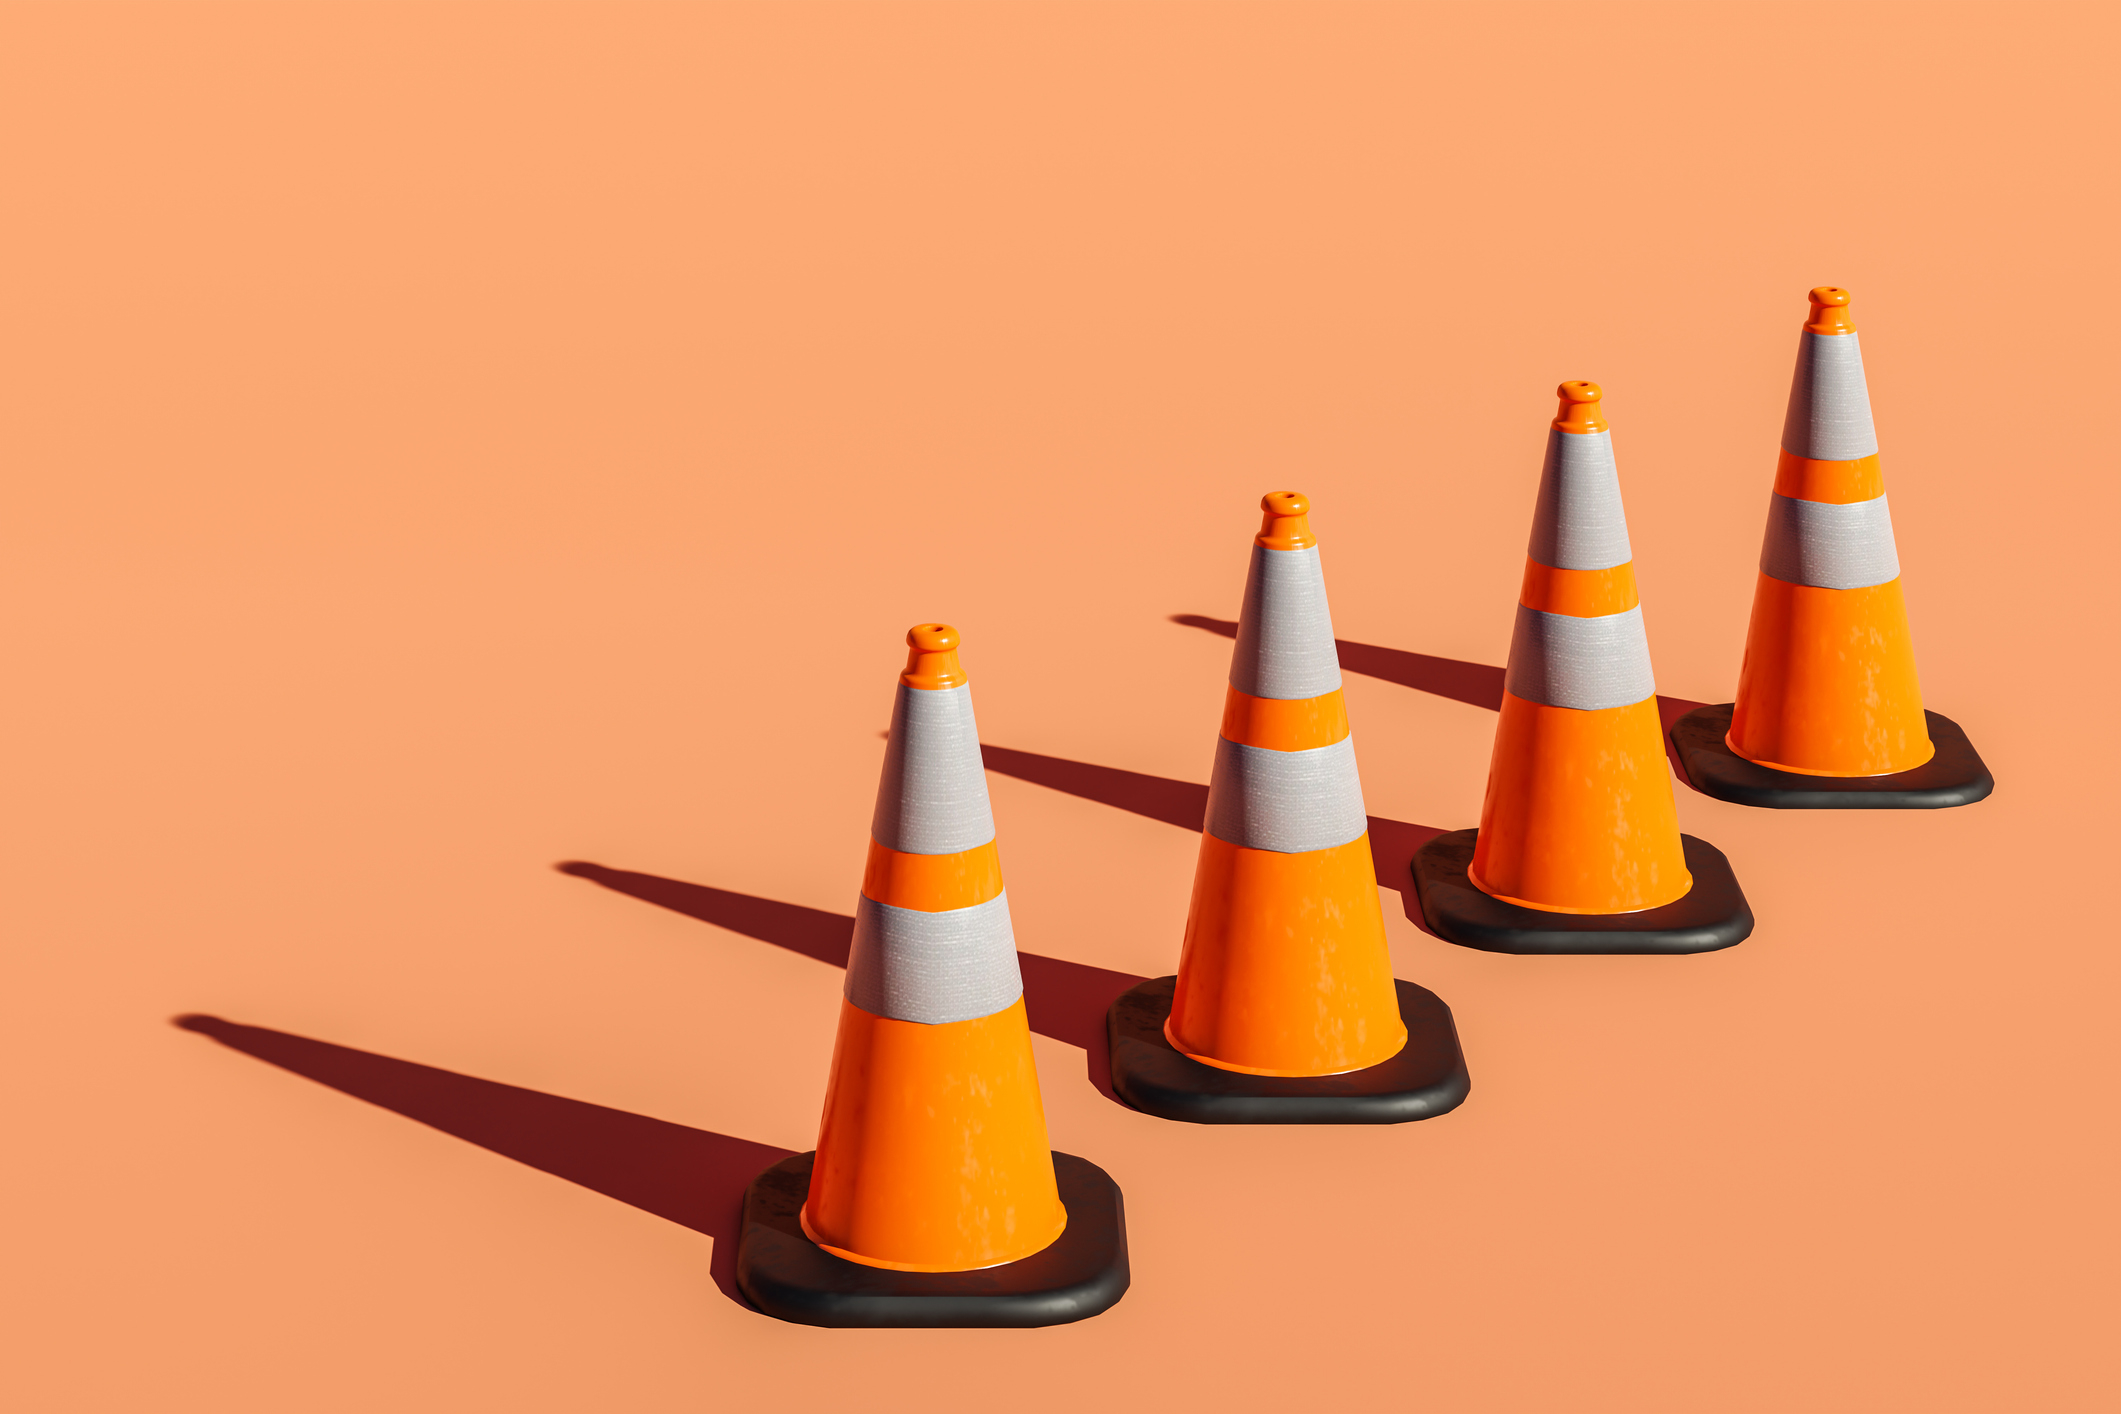 Four traffic cones in a row on a plain surface, casting shadows